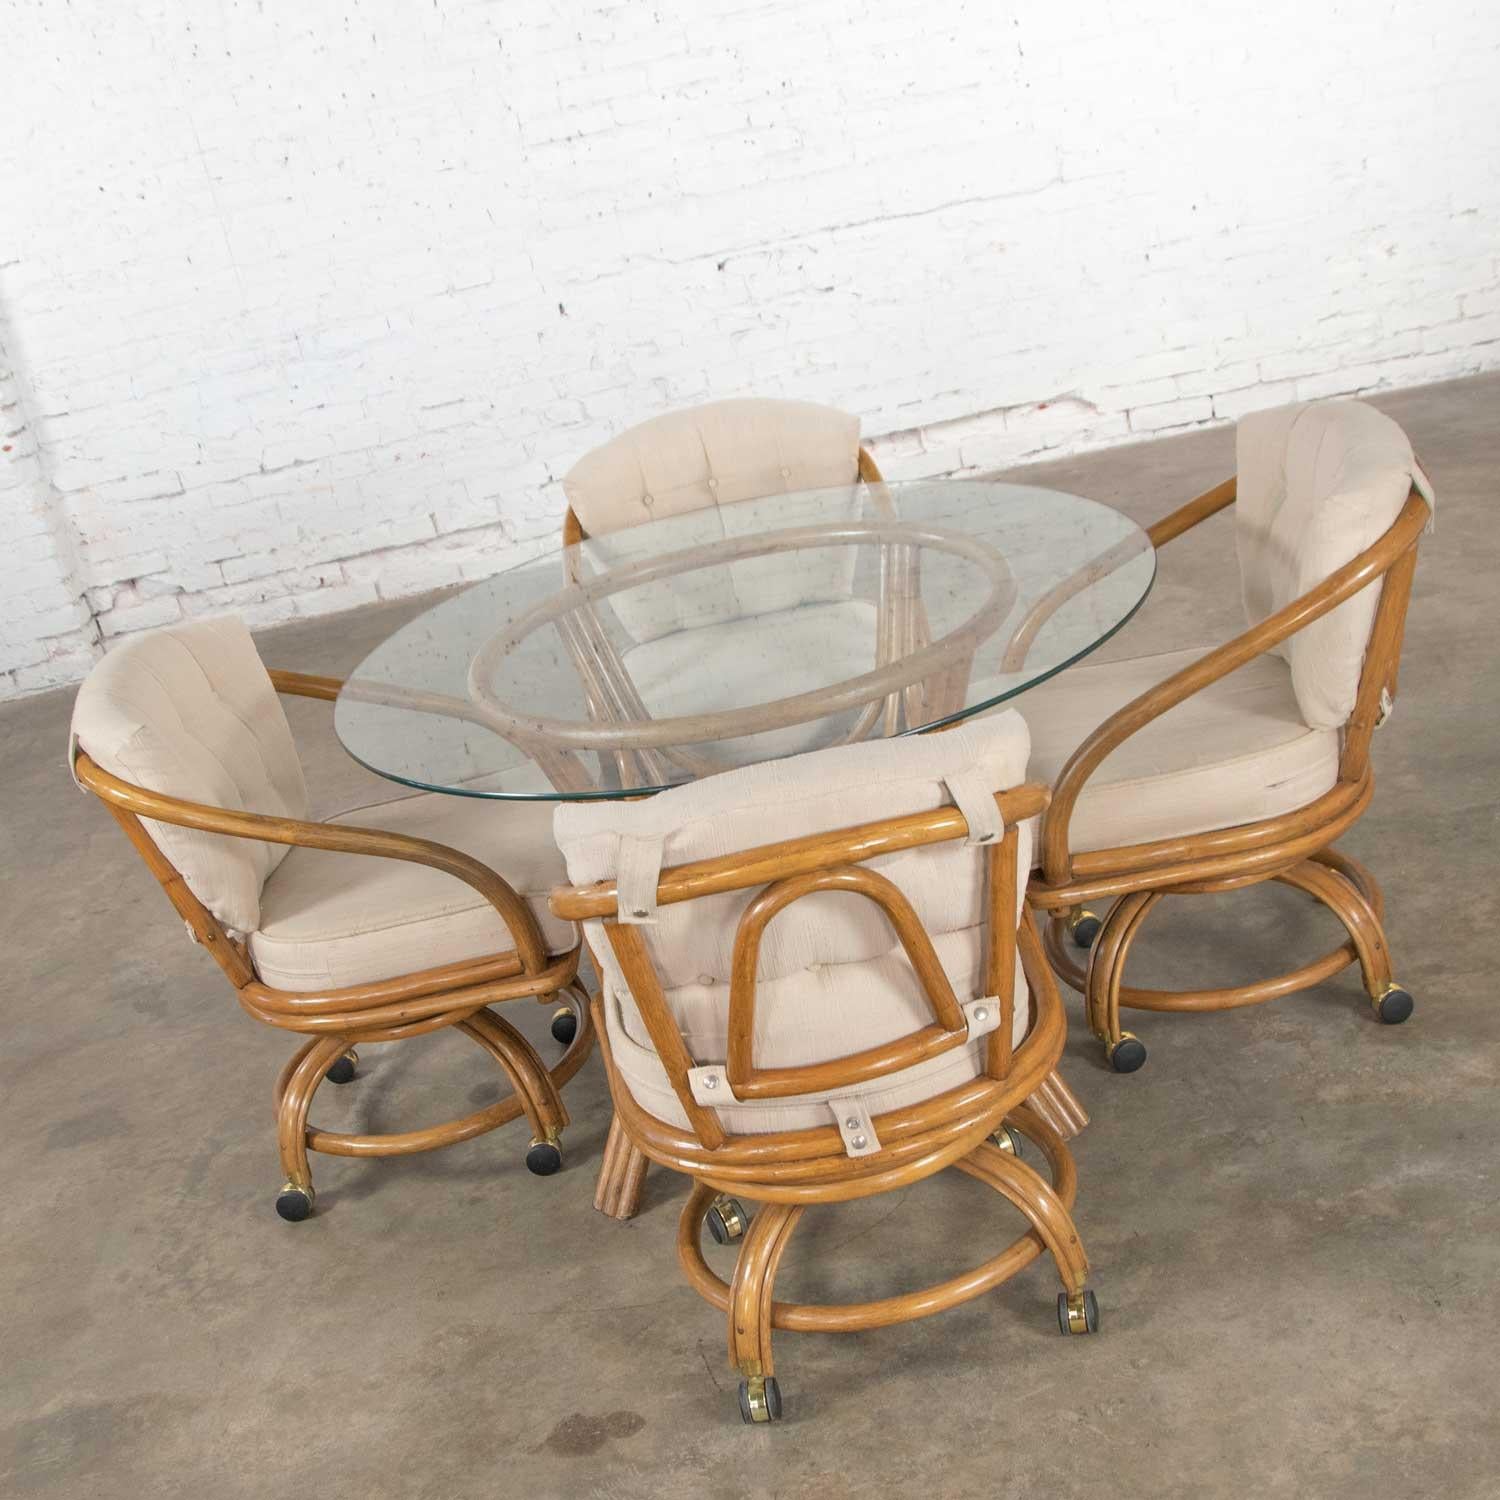 Handsome game table or dining table set including a round glass top rattan base table and four (4) swivel rolling rattan chairs with oatmeal colored upholstered removable seat and back cushions. They are in wonderful vintage condition. The cushions